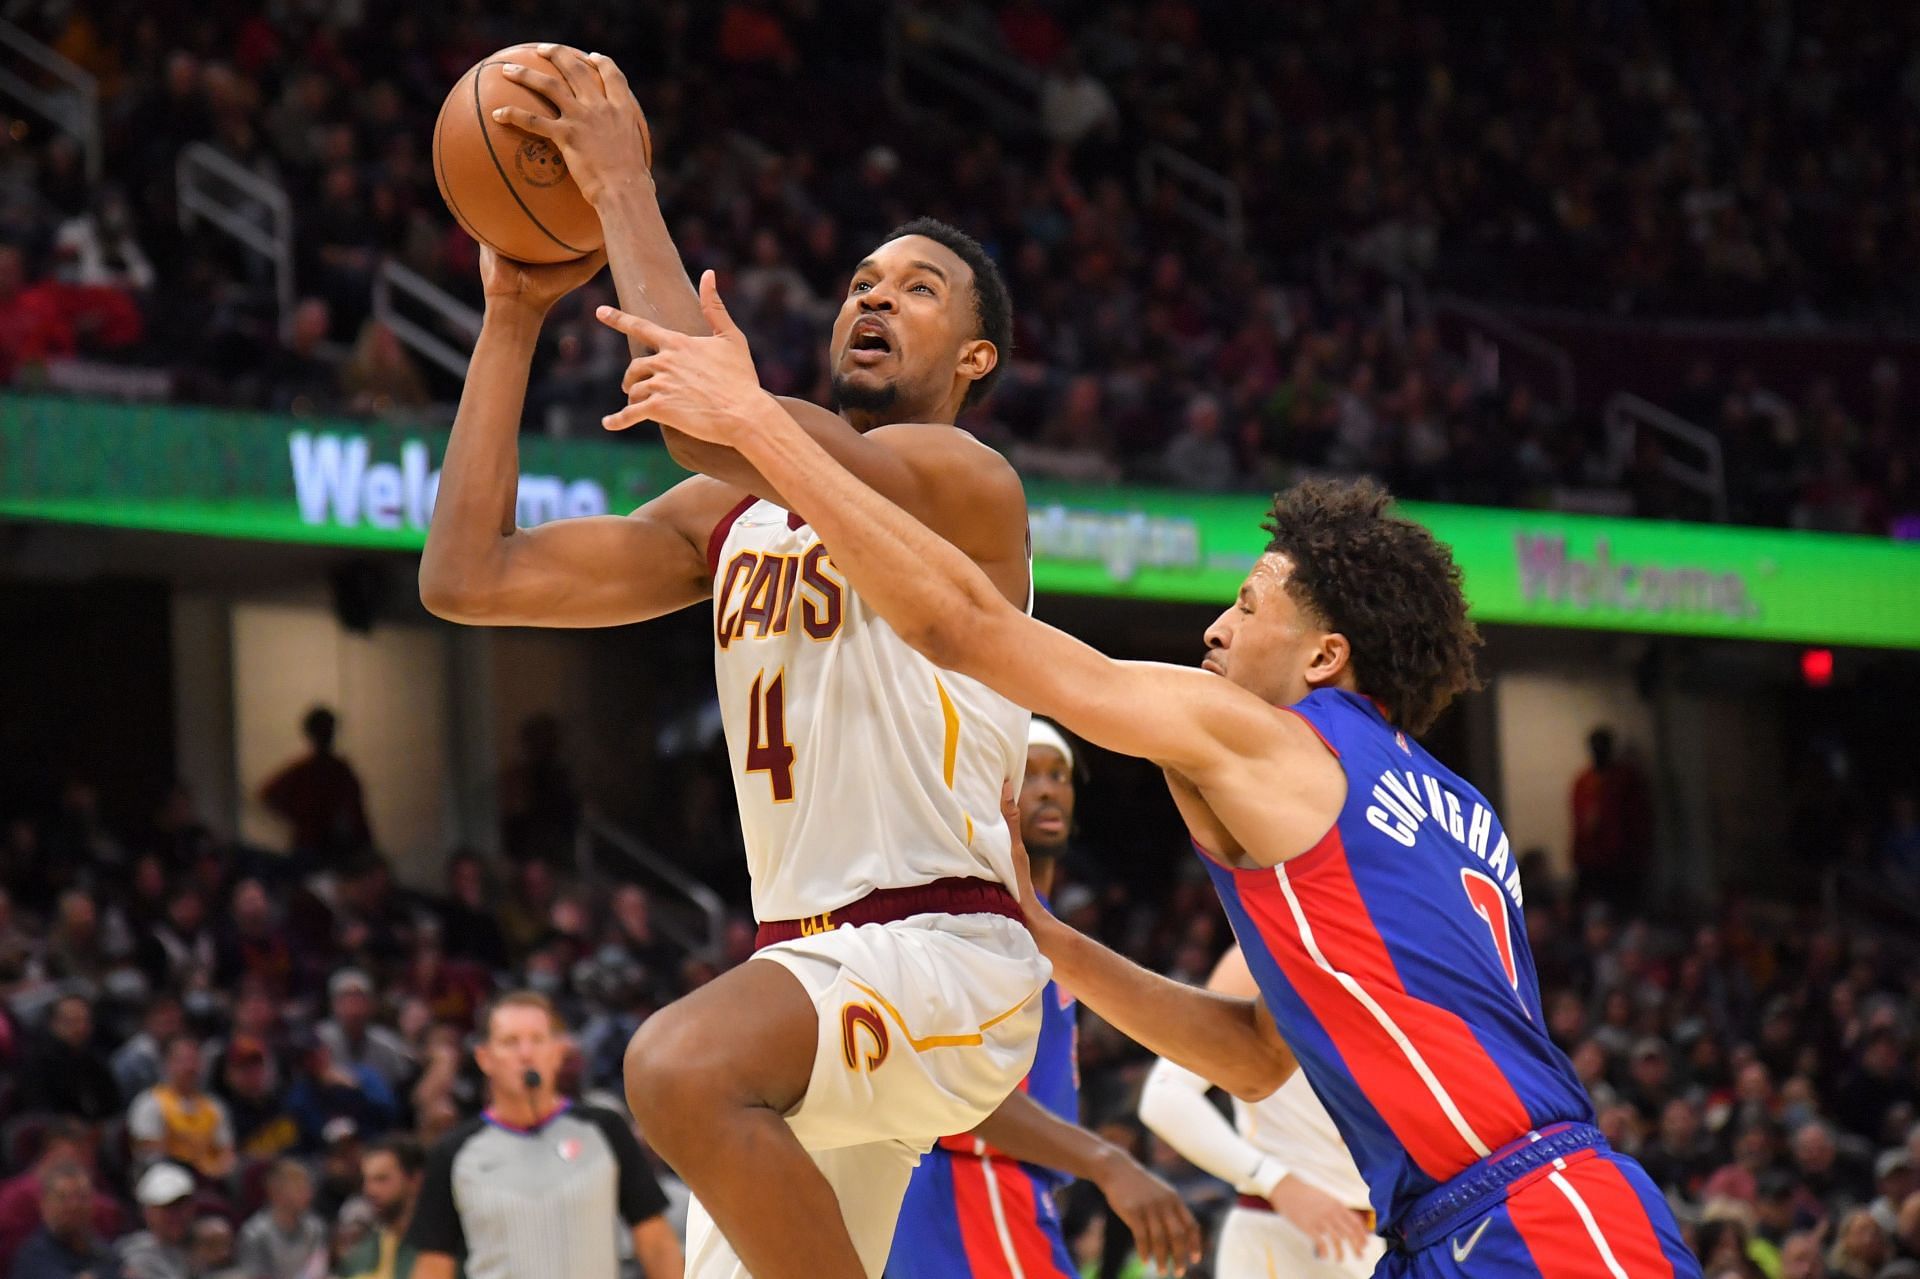 Evan Mobley attempts to score a layup at the Detroit Pistons v Cleveland Cavaliers game